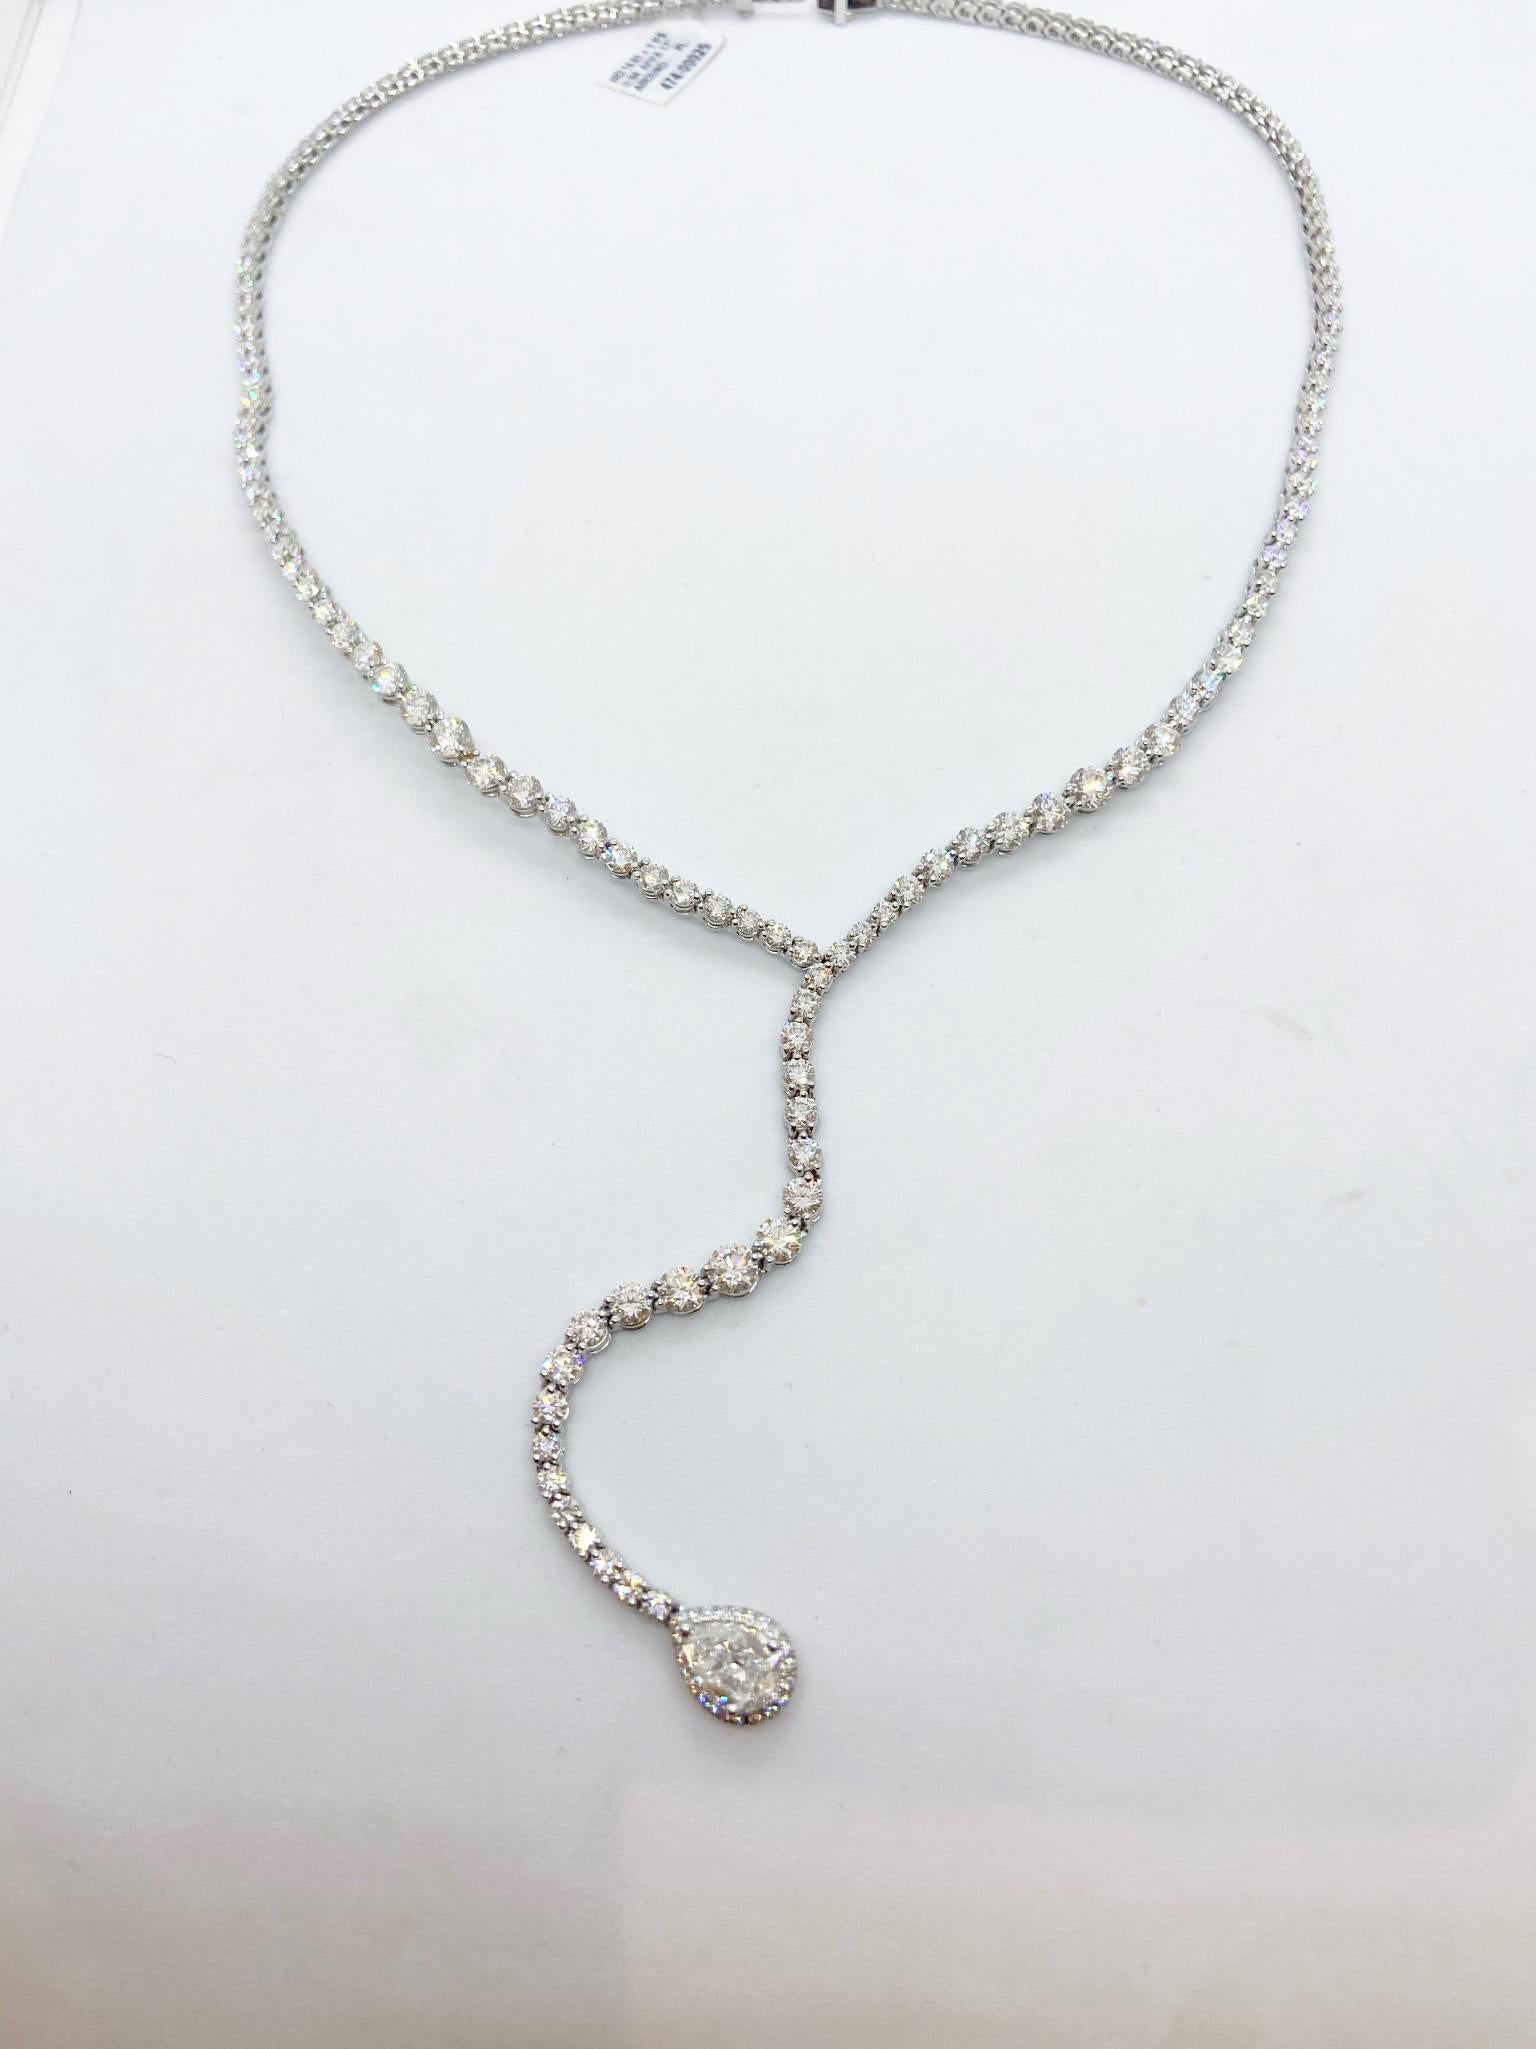 Gumuchian Platinum & Diamond 15.55Ct. Cascade Necklace with .94Ct. Pear Diamond In New Condition For Sale In New York, NY